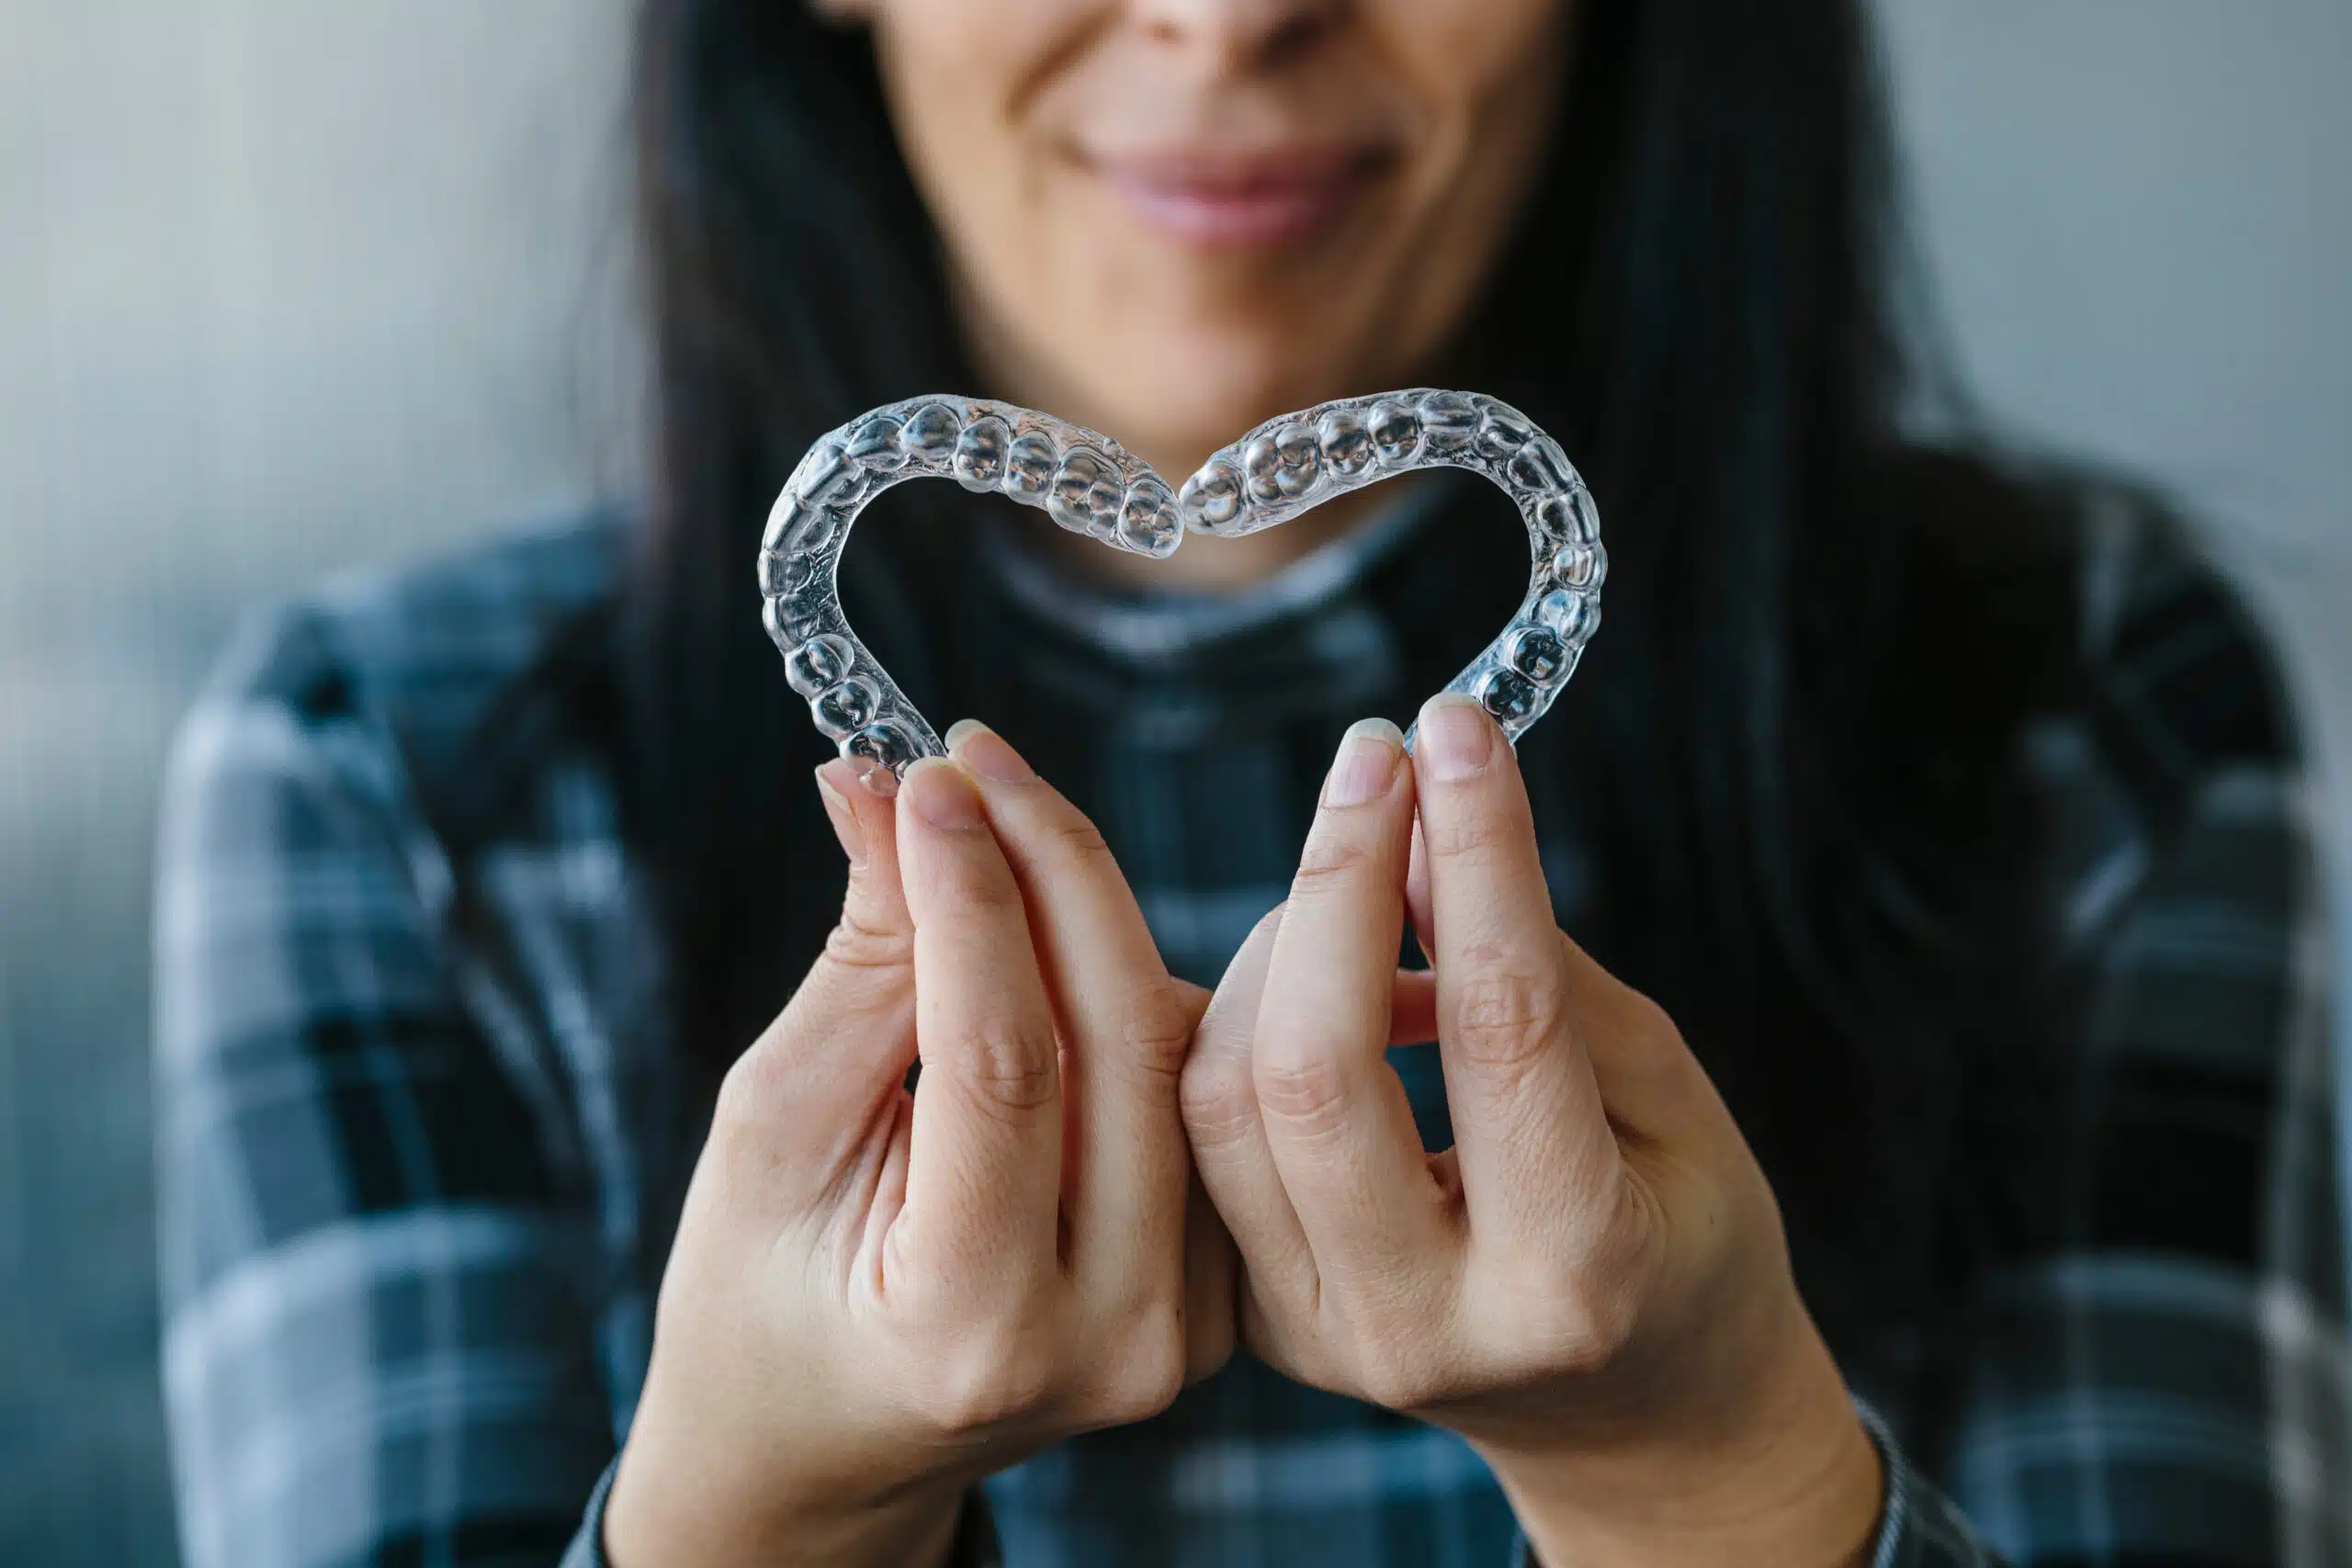 Get a straighter smile discreetly with Invisalign — the clear alternative to traditional braces.